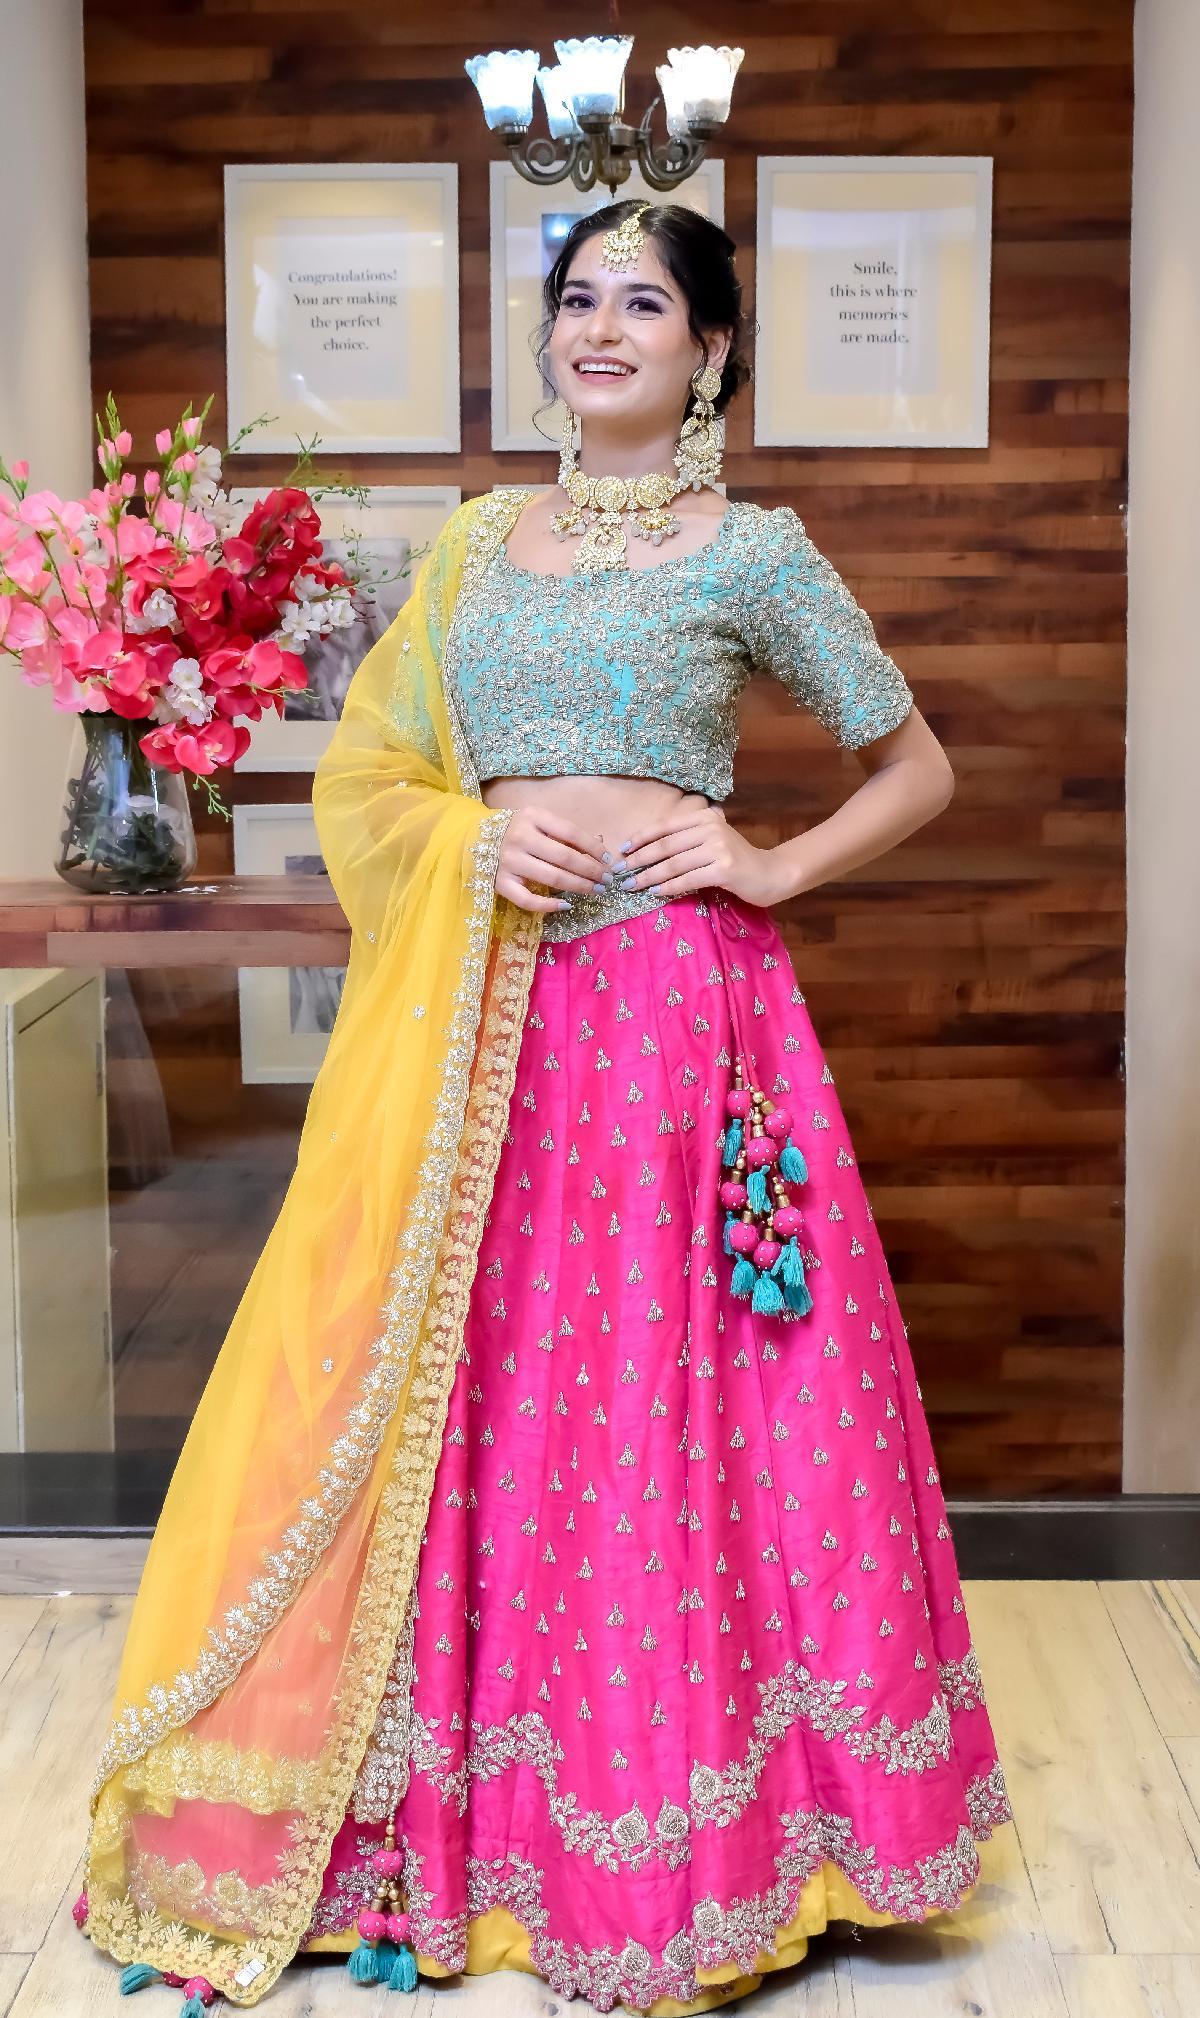 Beautiful Lehengas with superb embellishments with embroidery and color  combination. #Lehenga #issascollection #designer #colorcombination